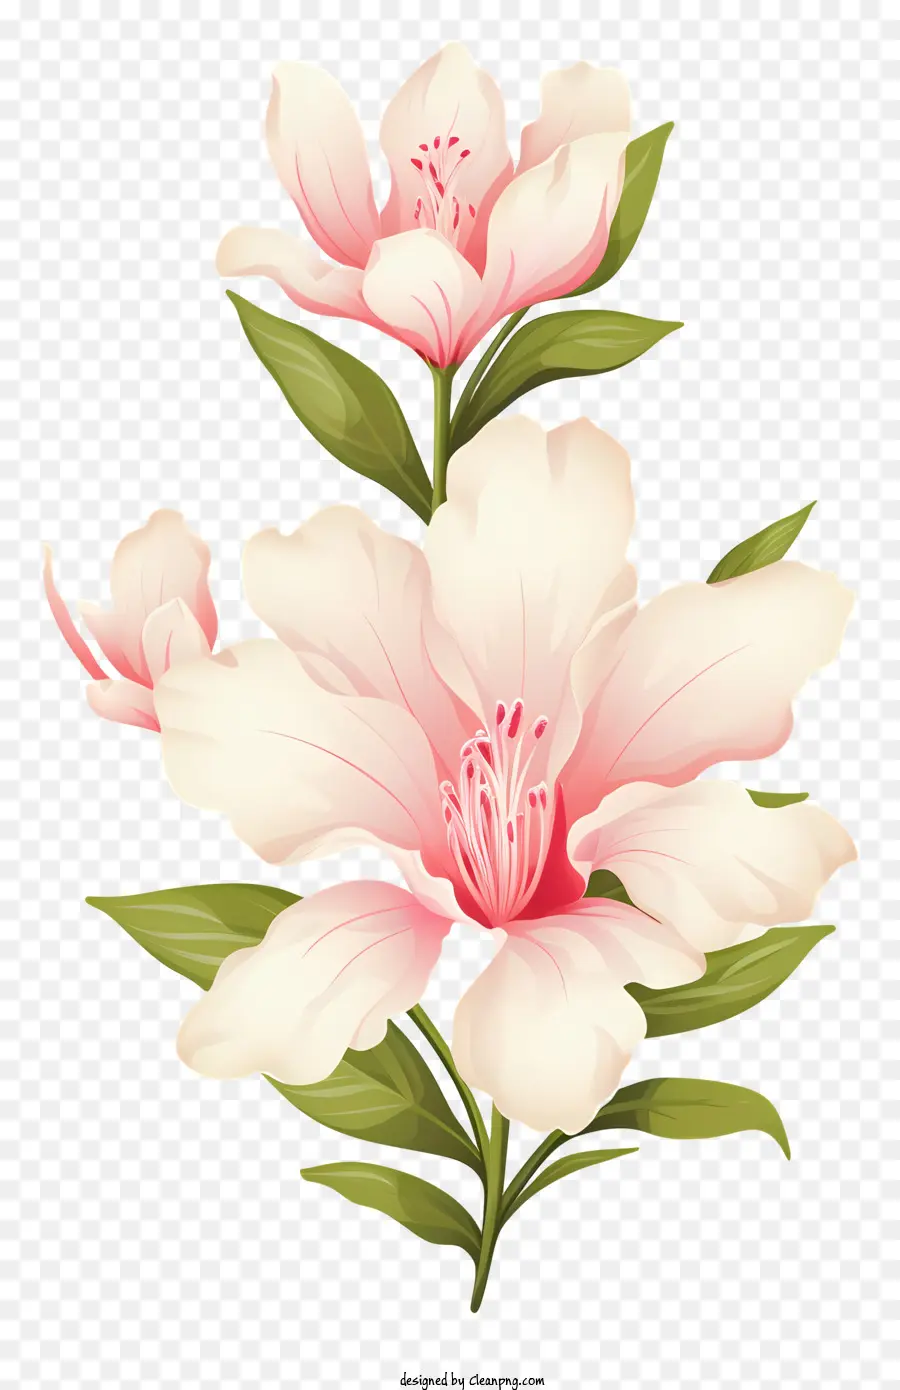 pink flowers bouquet white centers green leaves lifelike flowers